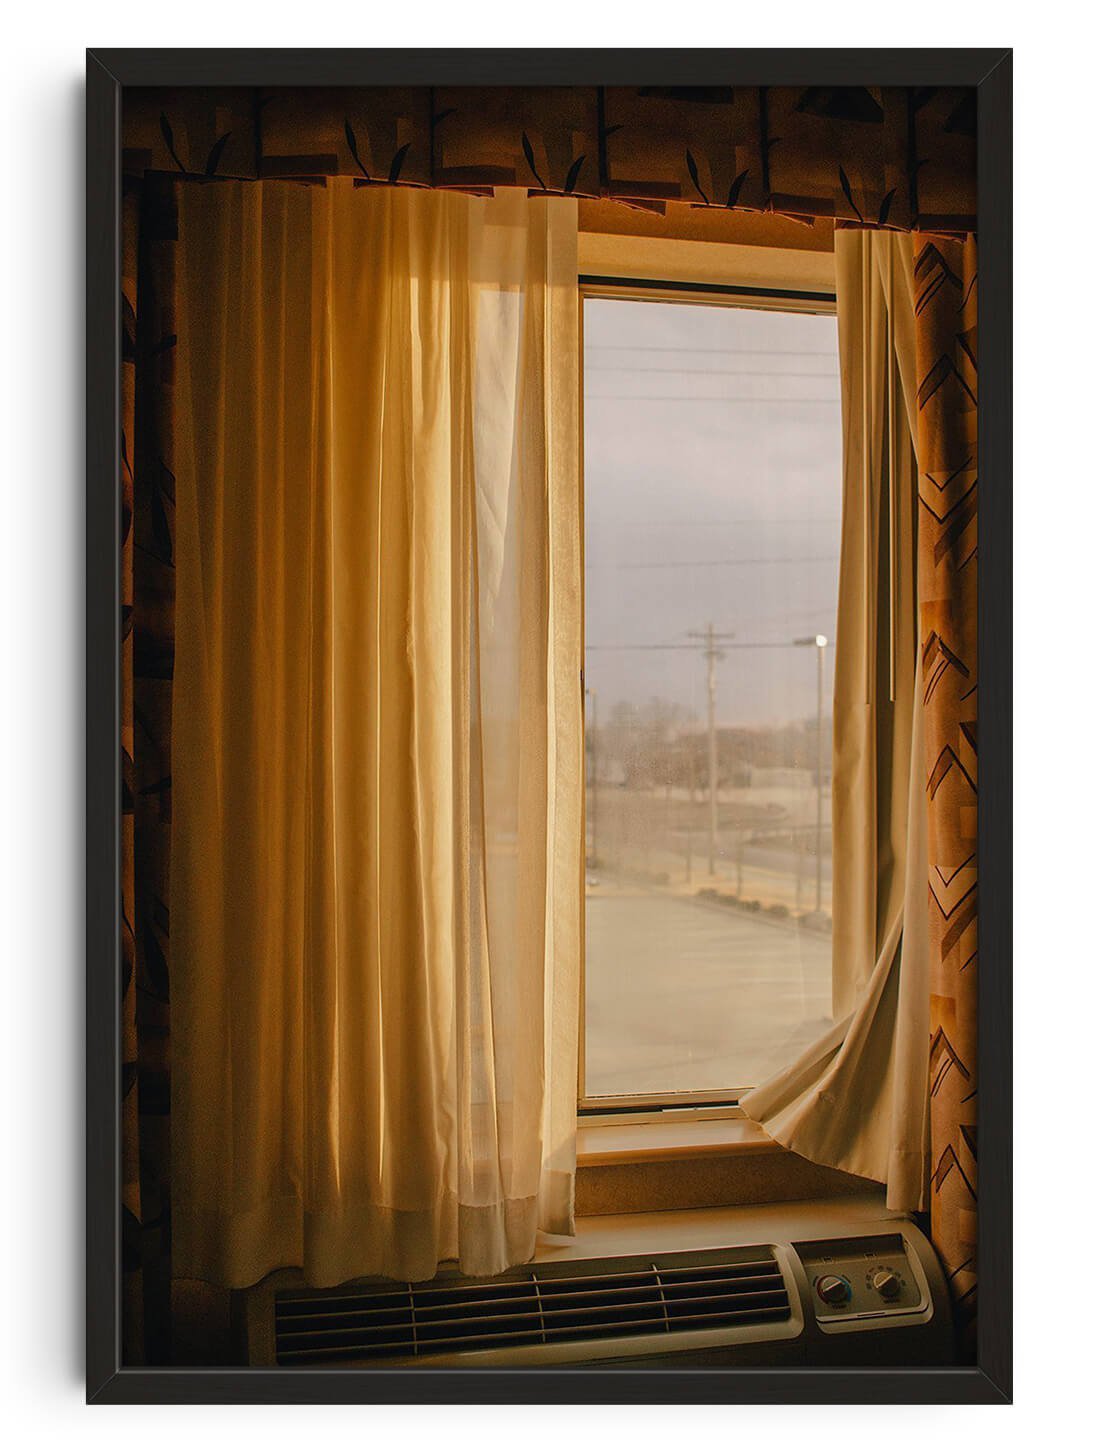 Hotel Daze contemporary wall art print by Kenzie Meeker - sold by DROOL